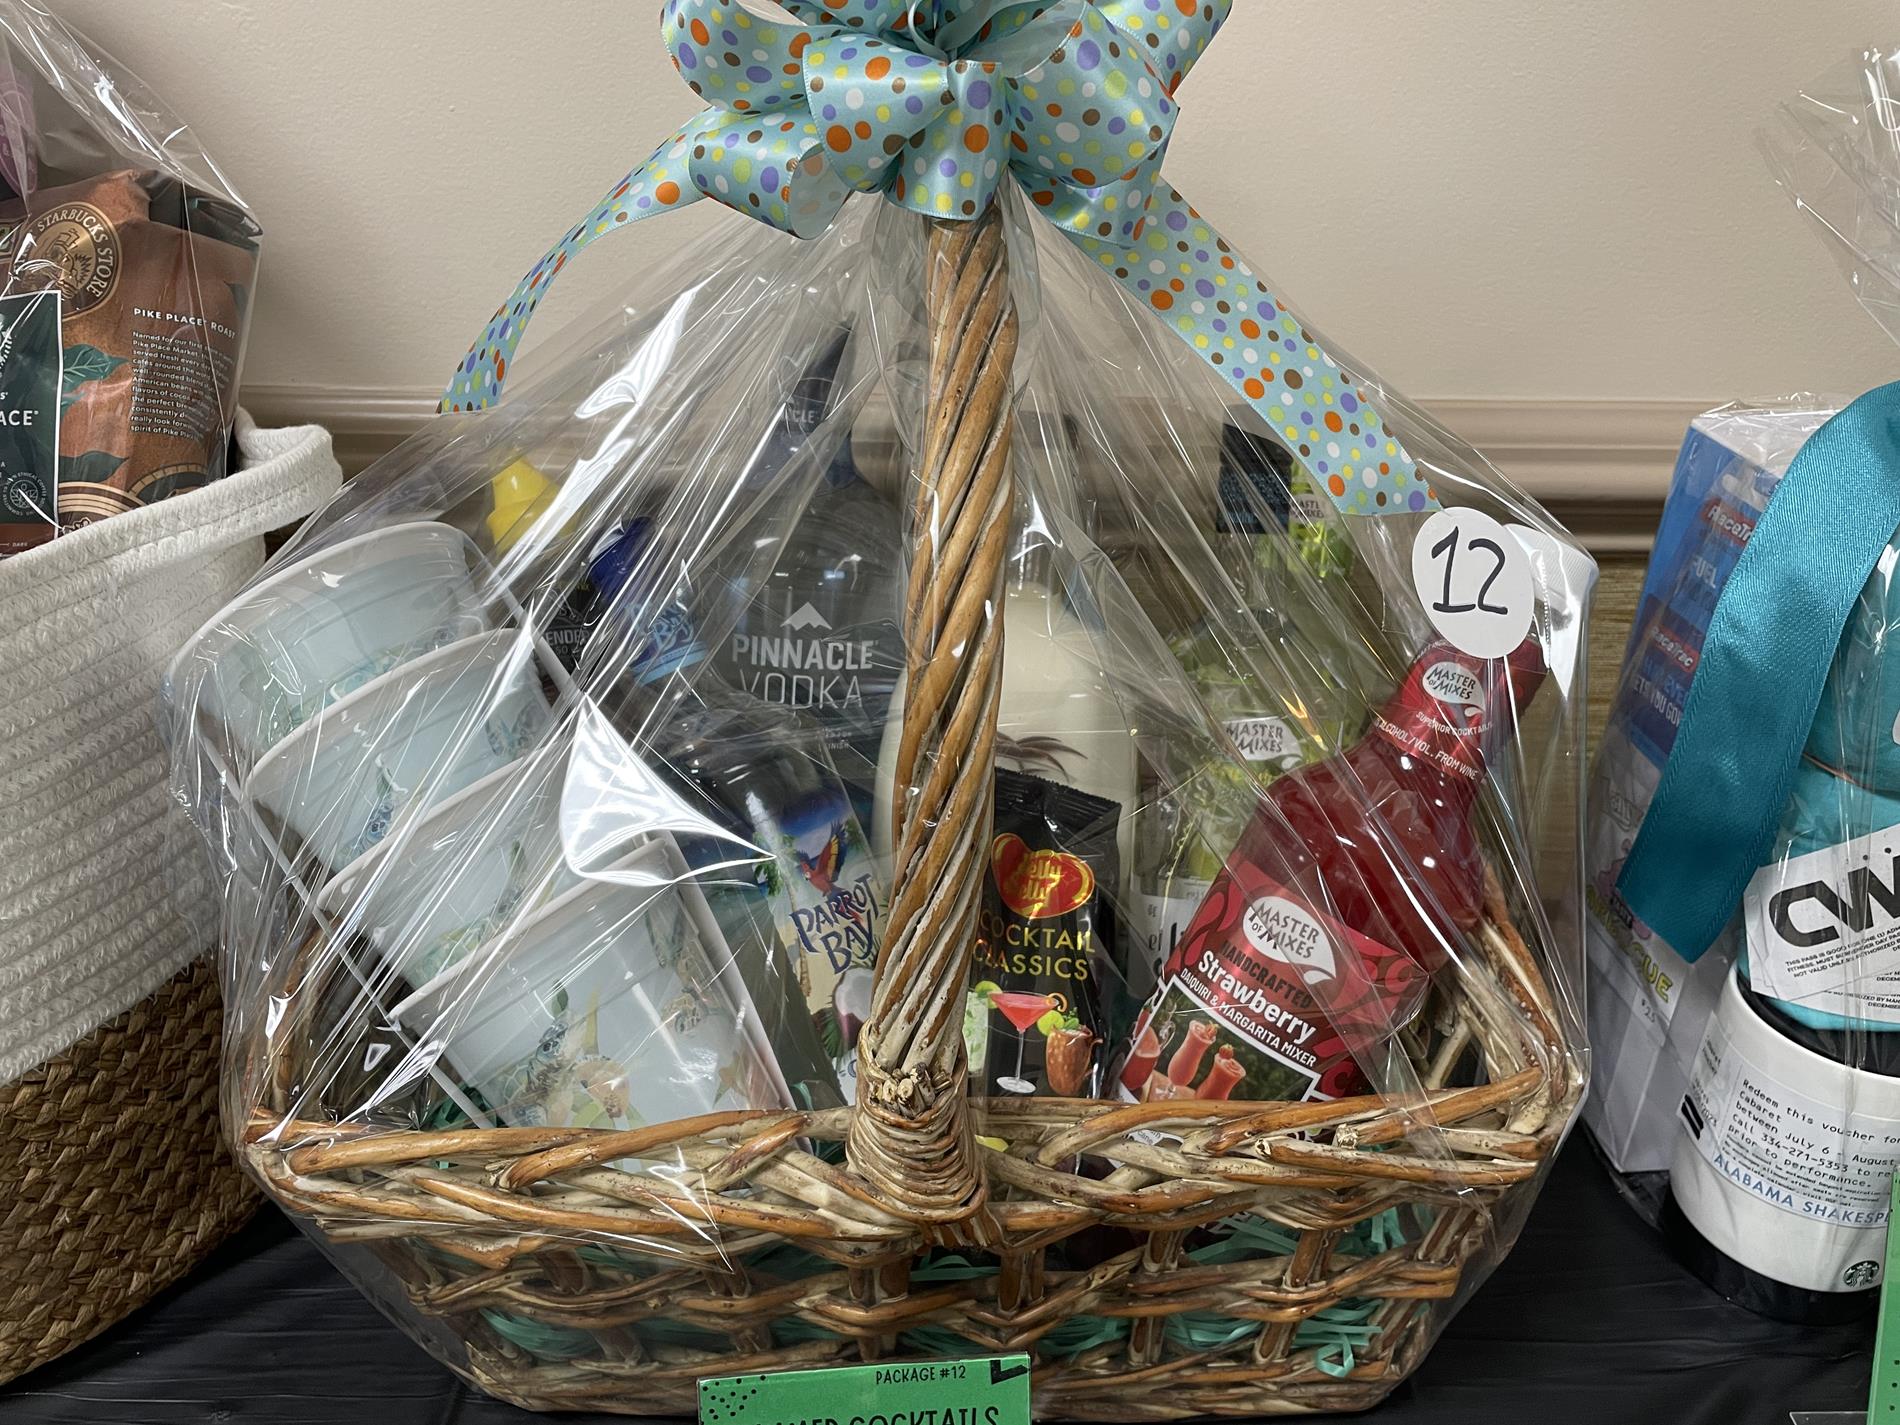 Make lots of friends with this basket!